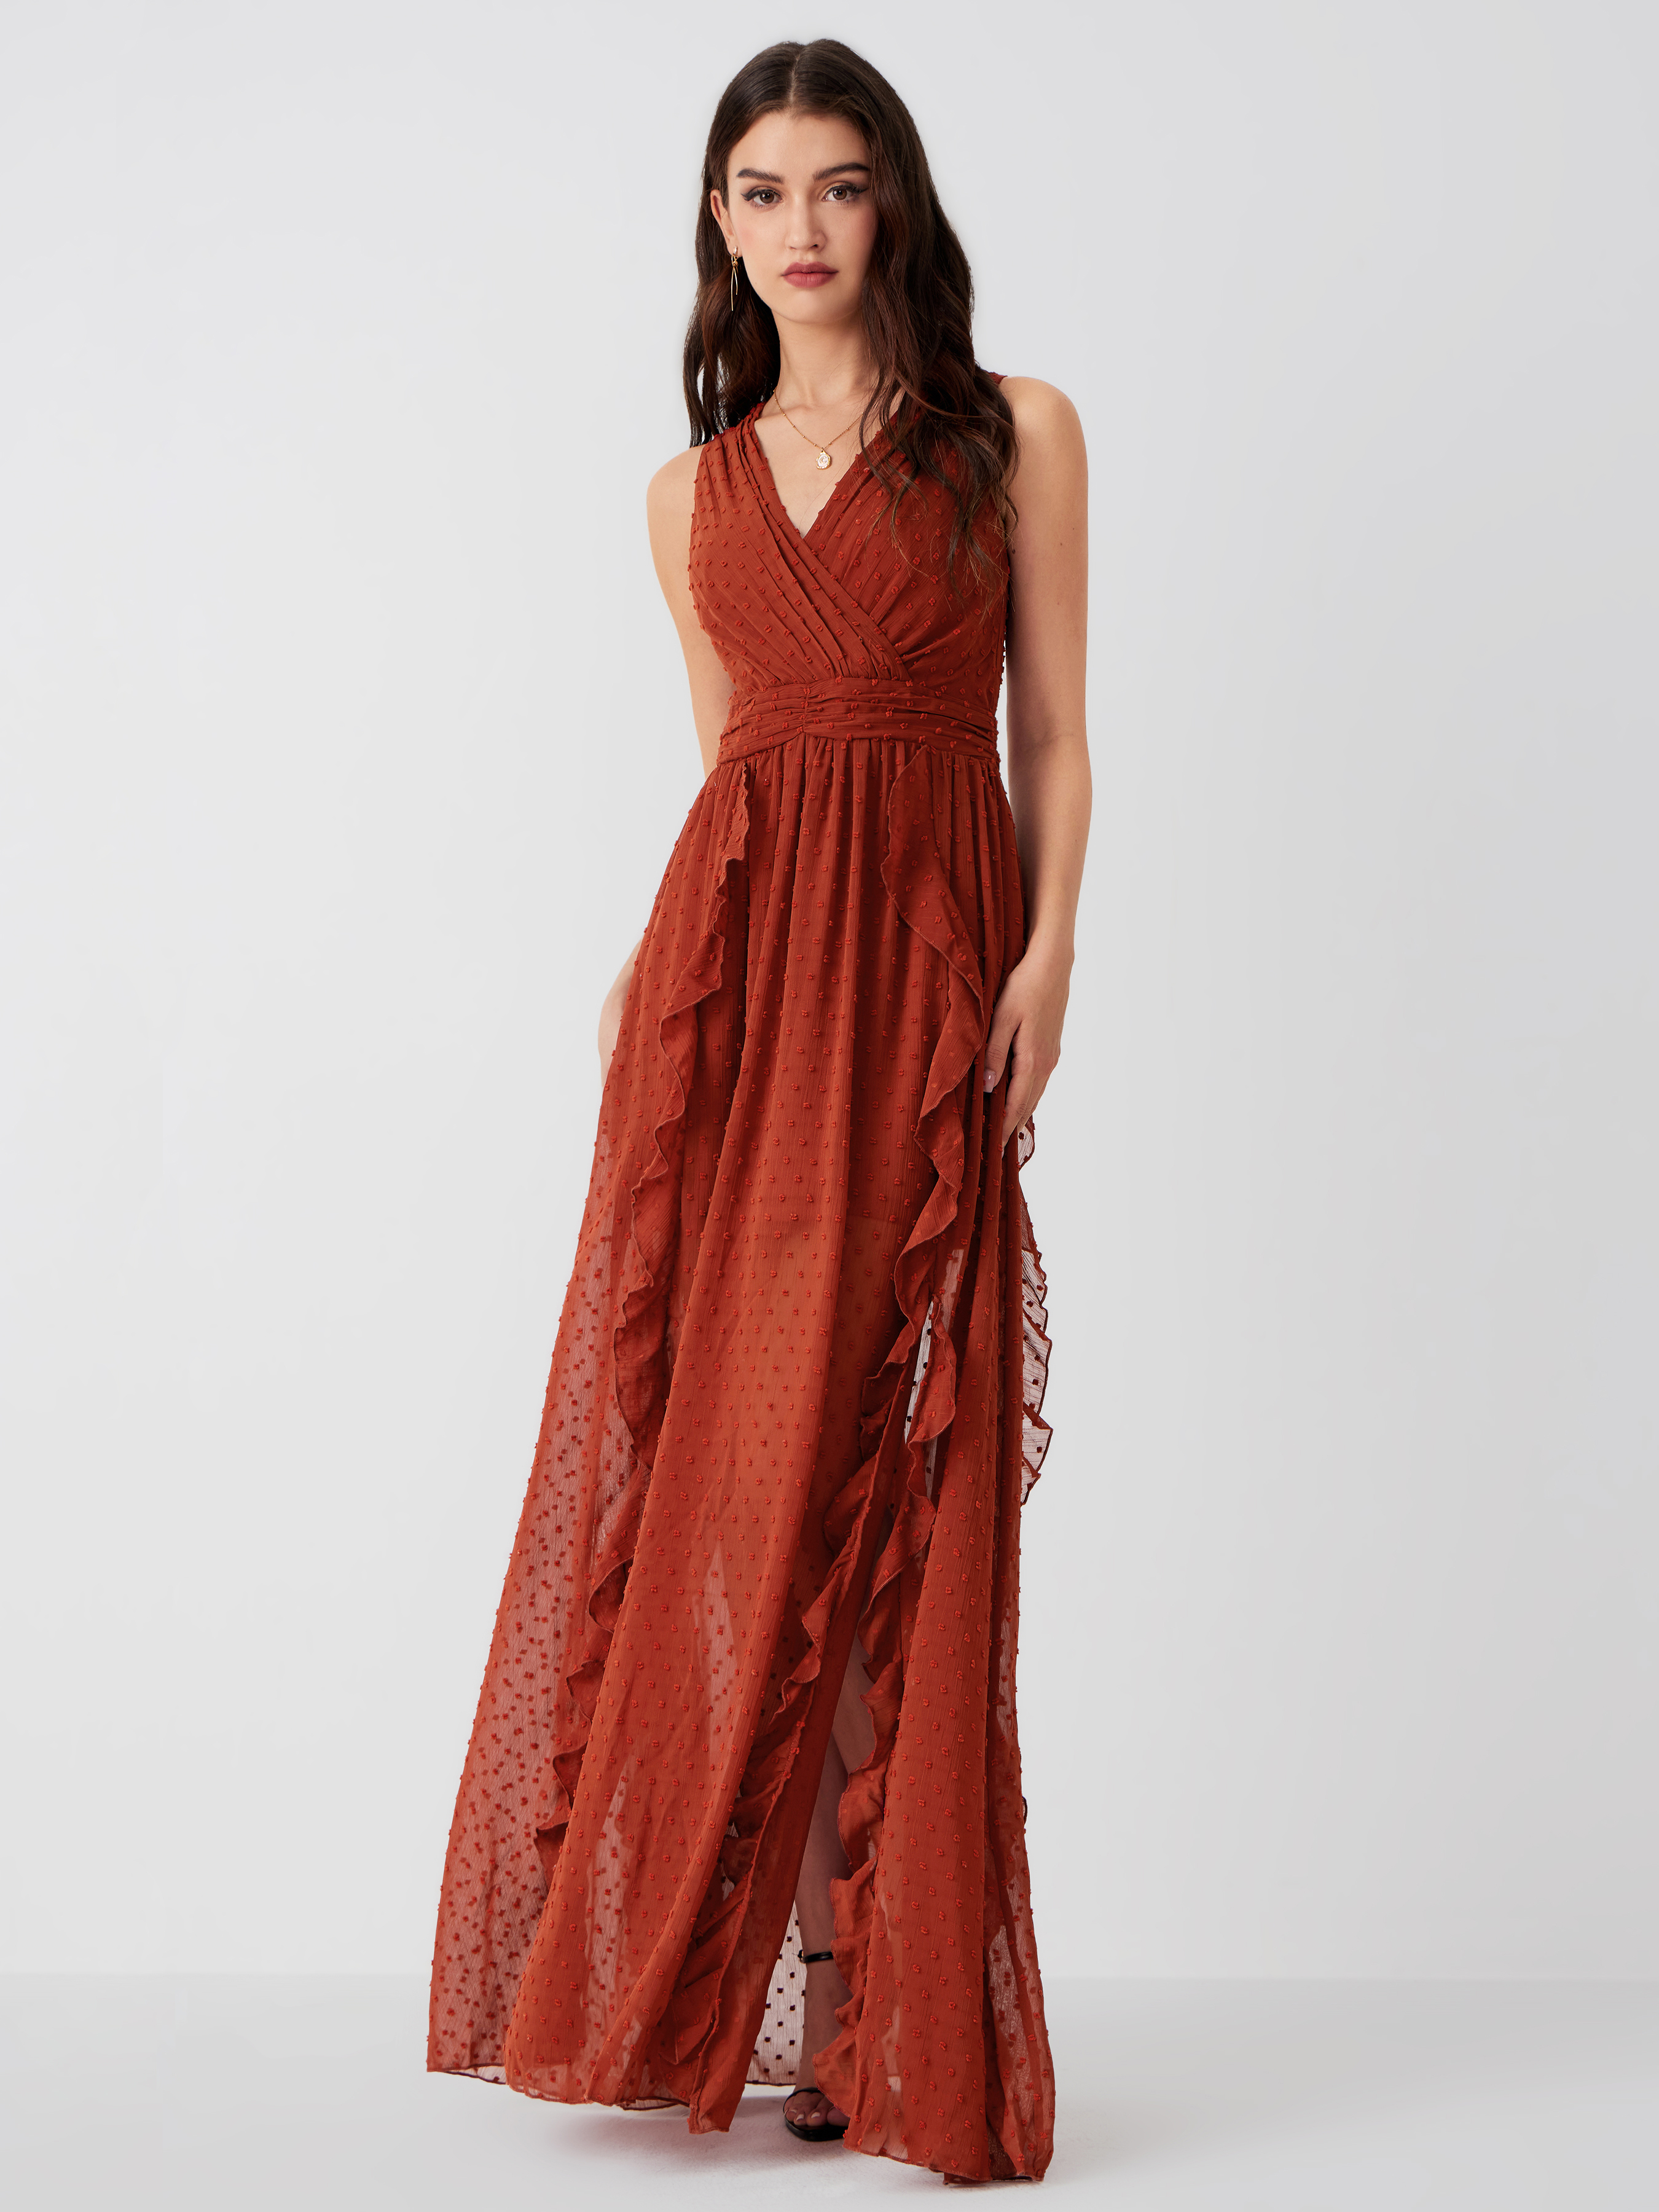 The Red Maxi Dress: How to Wear This Season's Hottest Look